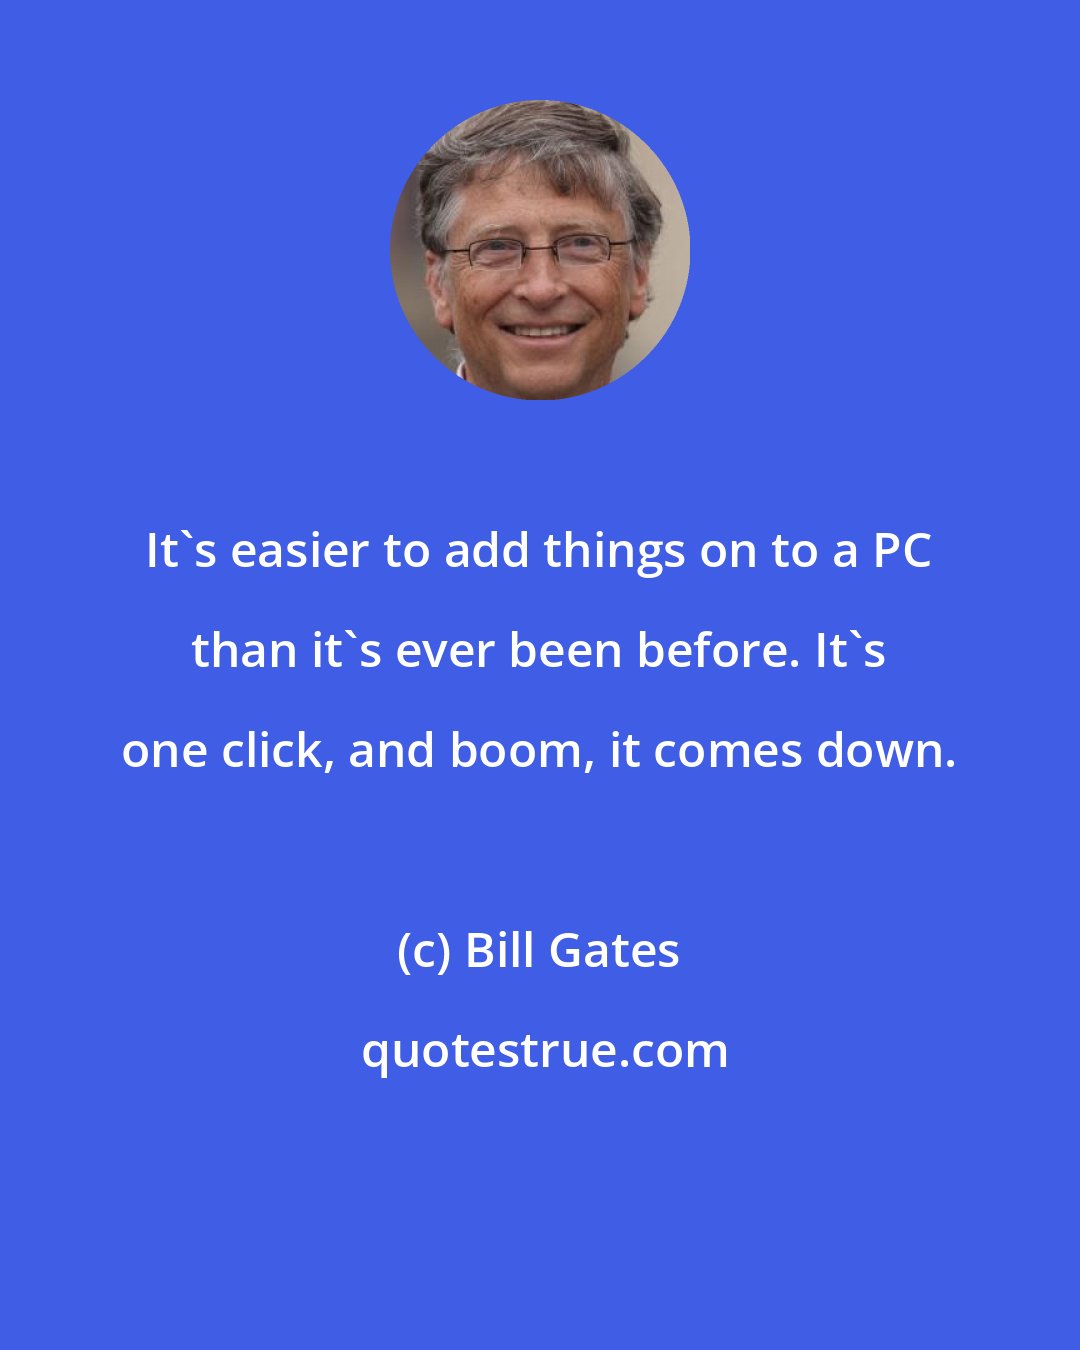 Bill Gates: It's easier to add things on to a PC than it's ever been before. It's one click, and boom, it comes down.